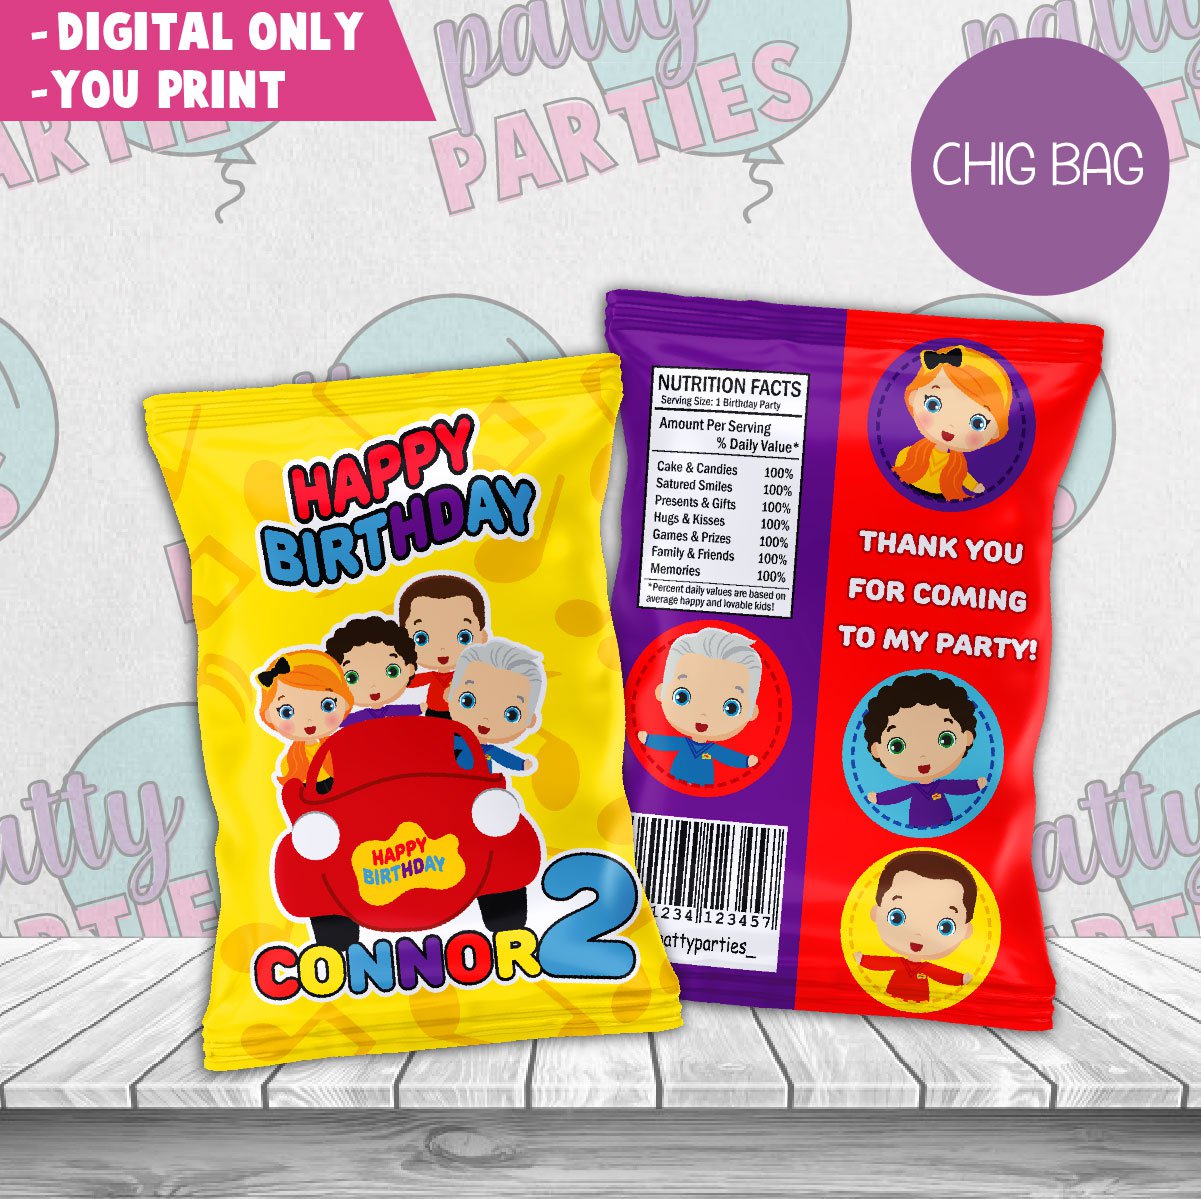 THE WIGGLES CHIP BAG